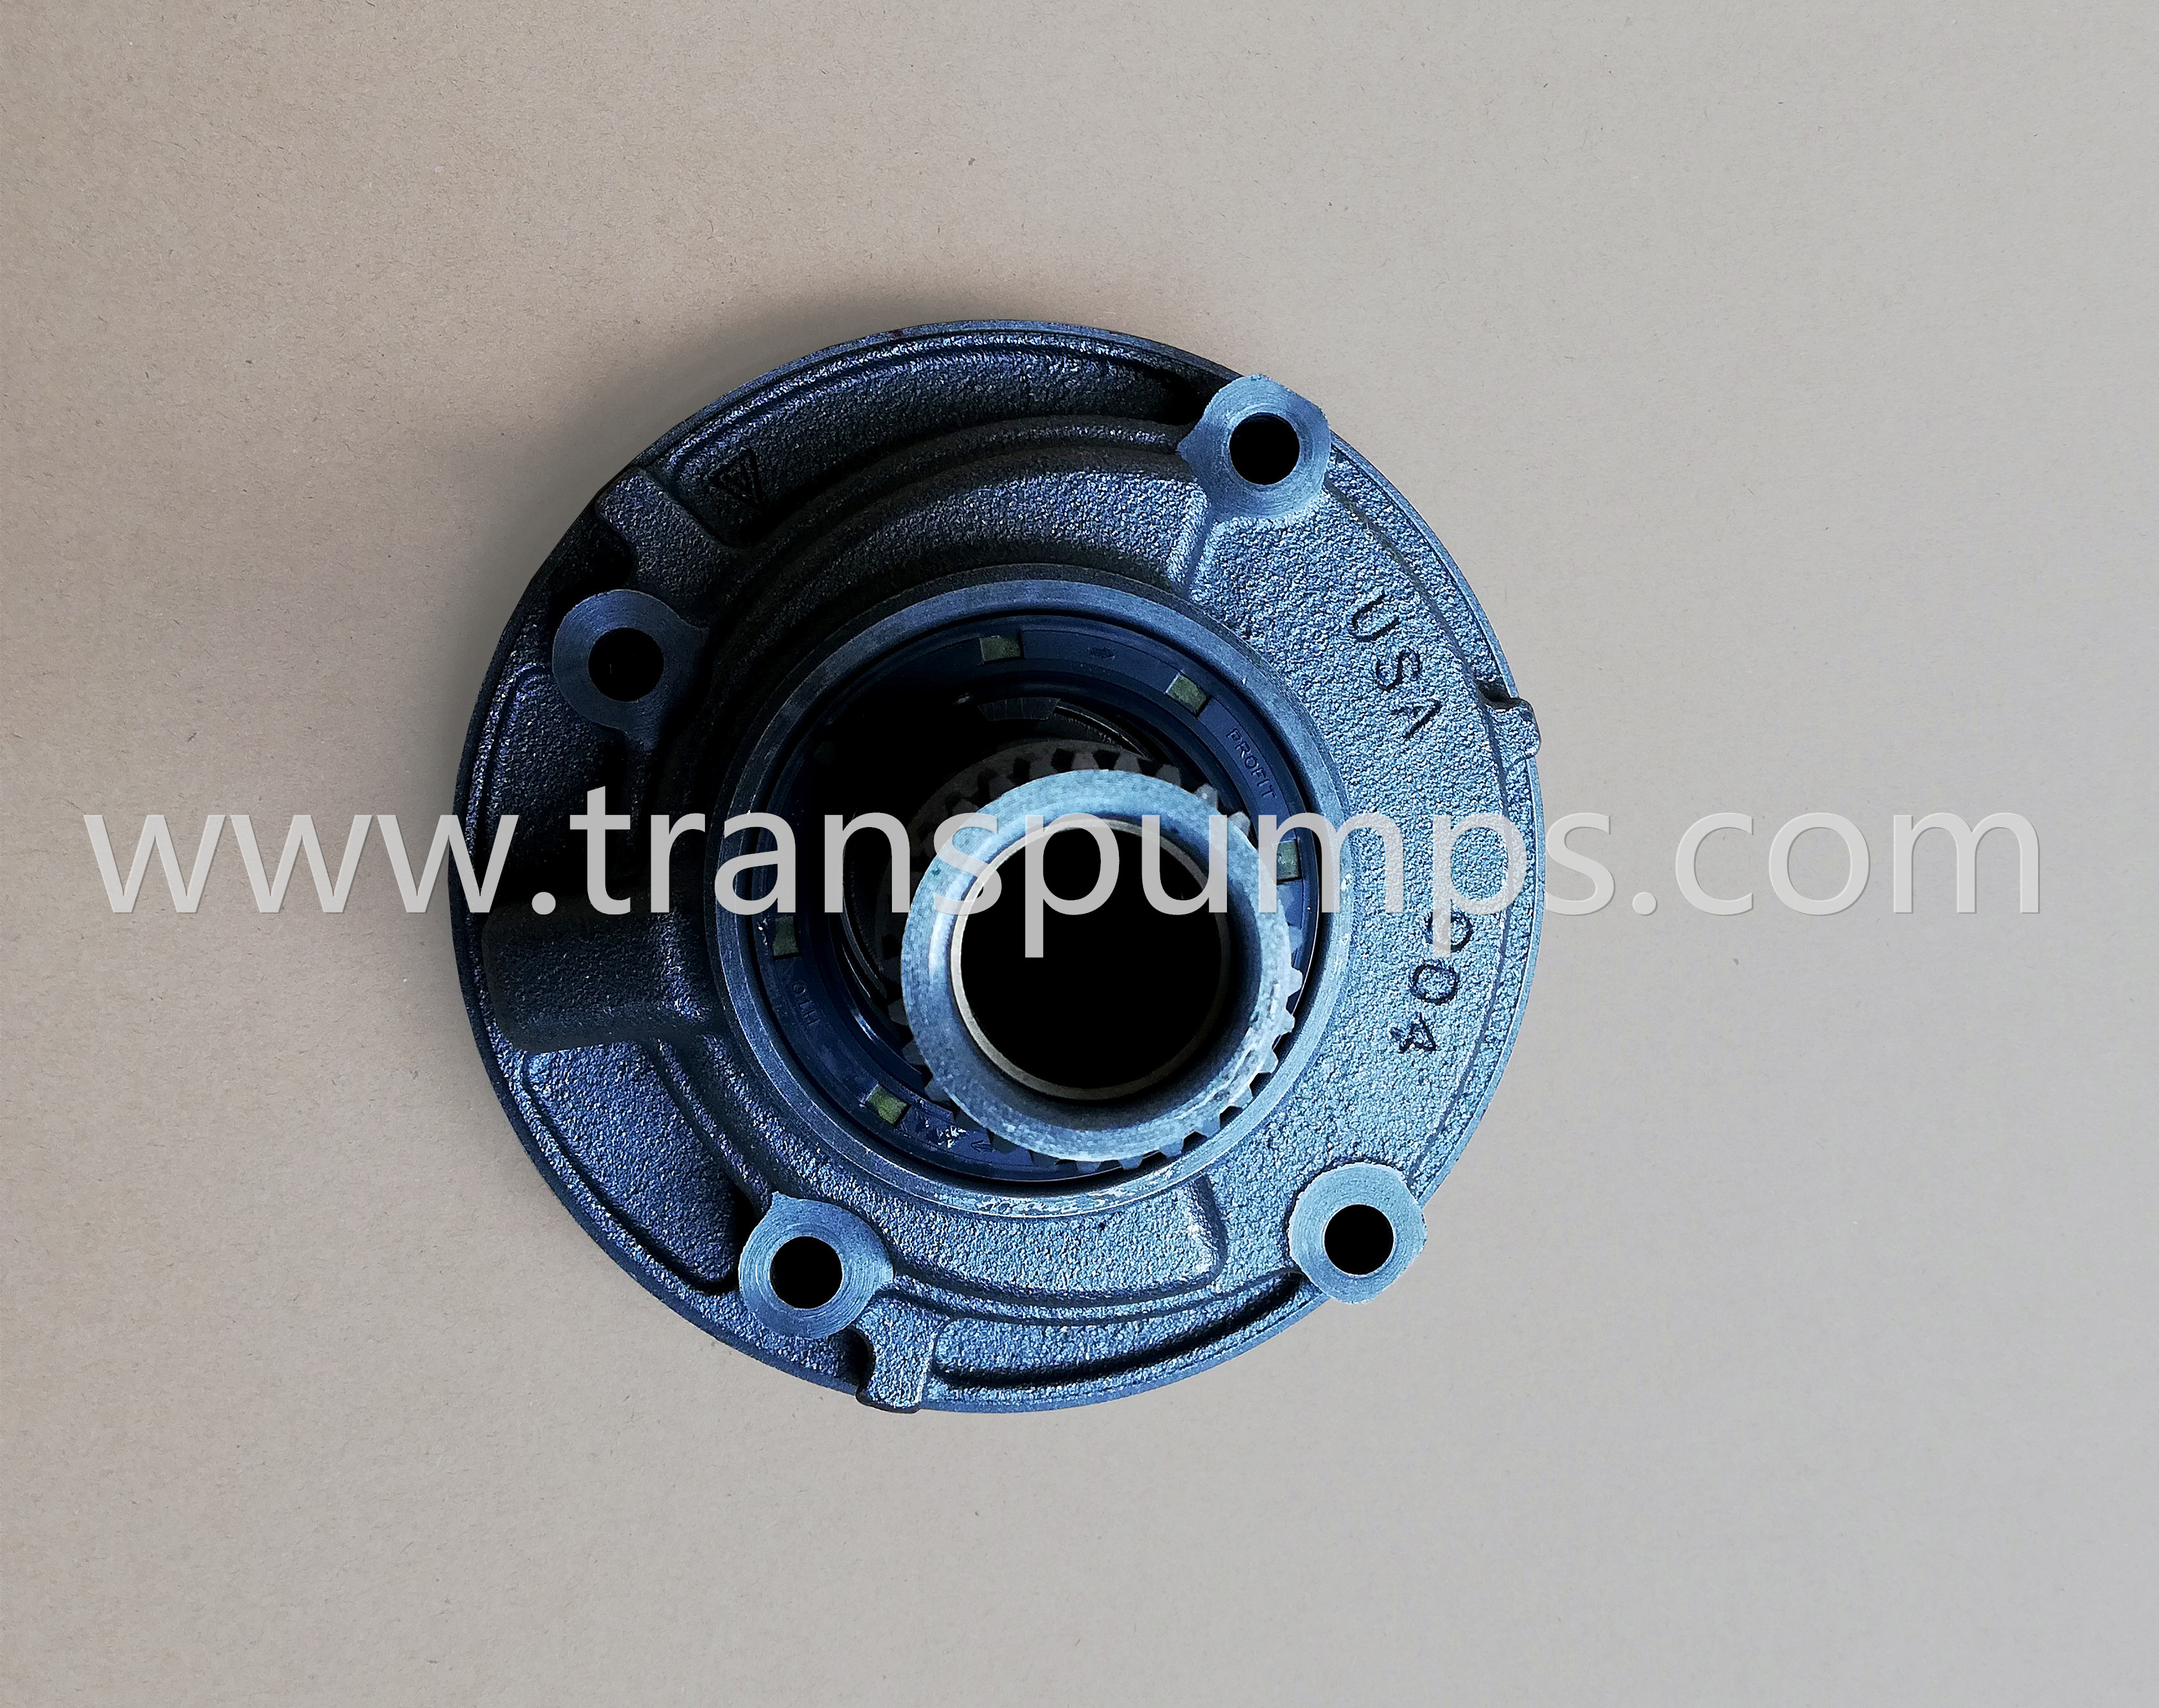 Case torque charge pump, transmission charge pump for CASE machine, transmission pump for case, transmission oil gear pump, New aftermarket transmission charge oil pump assembly, transmission pump CASE machines, US OEM transmission pump CASE machines, shuttle transmission charge pump, transmission oil pump assy, transmission pump replacement price, new aftermarket hydraulic pump, case backhoe hydraulic pump, case backhoe fuel pump,case 580 fuel pump, case hydraulic pump,case 580k lift pump, case 580 lift pump, case 580l lift pump,case lift pump, case pump price, case pumps,case pump 580k, case 685 hydraulic pump, case 580k transmission pump, case 580k transmission pump, case 580l transmission pump,case 580d transmission pump, case 580 super k transmission pump, case 580 super transmission pump.Backhoe pump, backhoe main pump,backhoe fuel pump, backhoe charge pump，pumpa hidraulike，CASE transmission charging pump for backhoe loader, part no: 137093A1